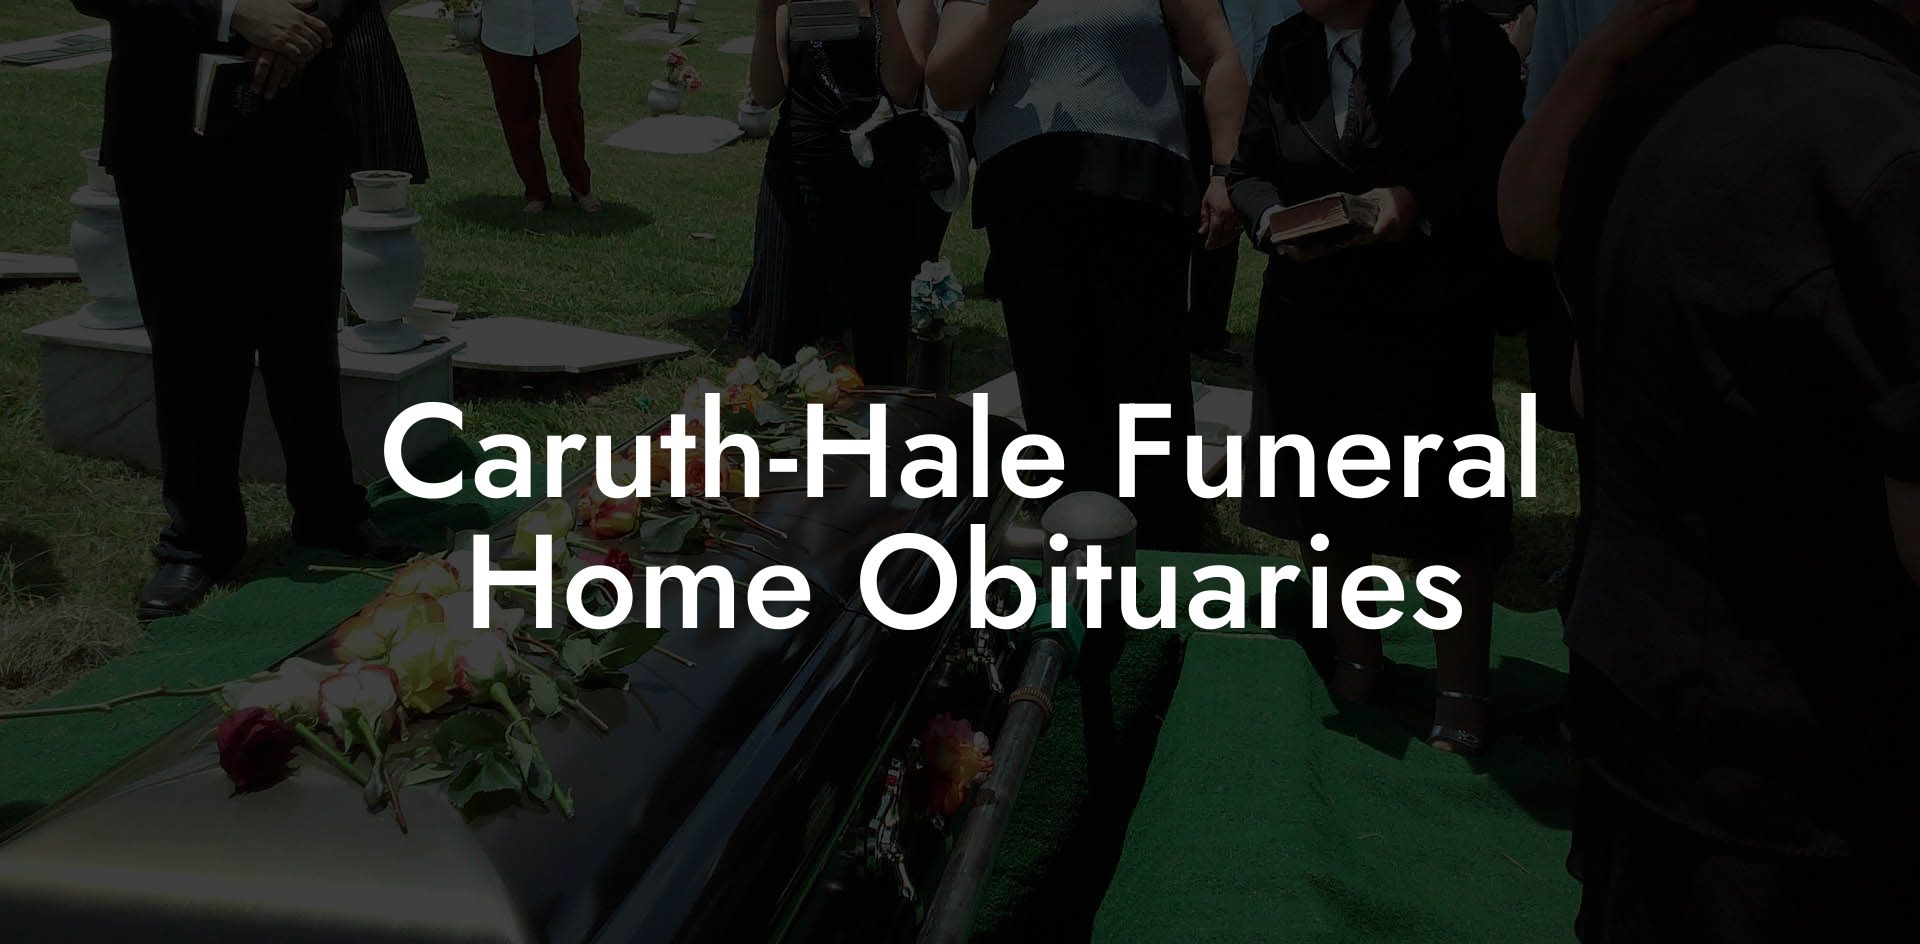 Caruth-Hale Funeral Home Obituaries